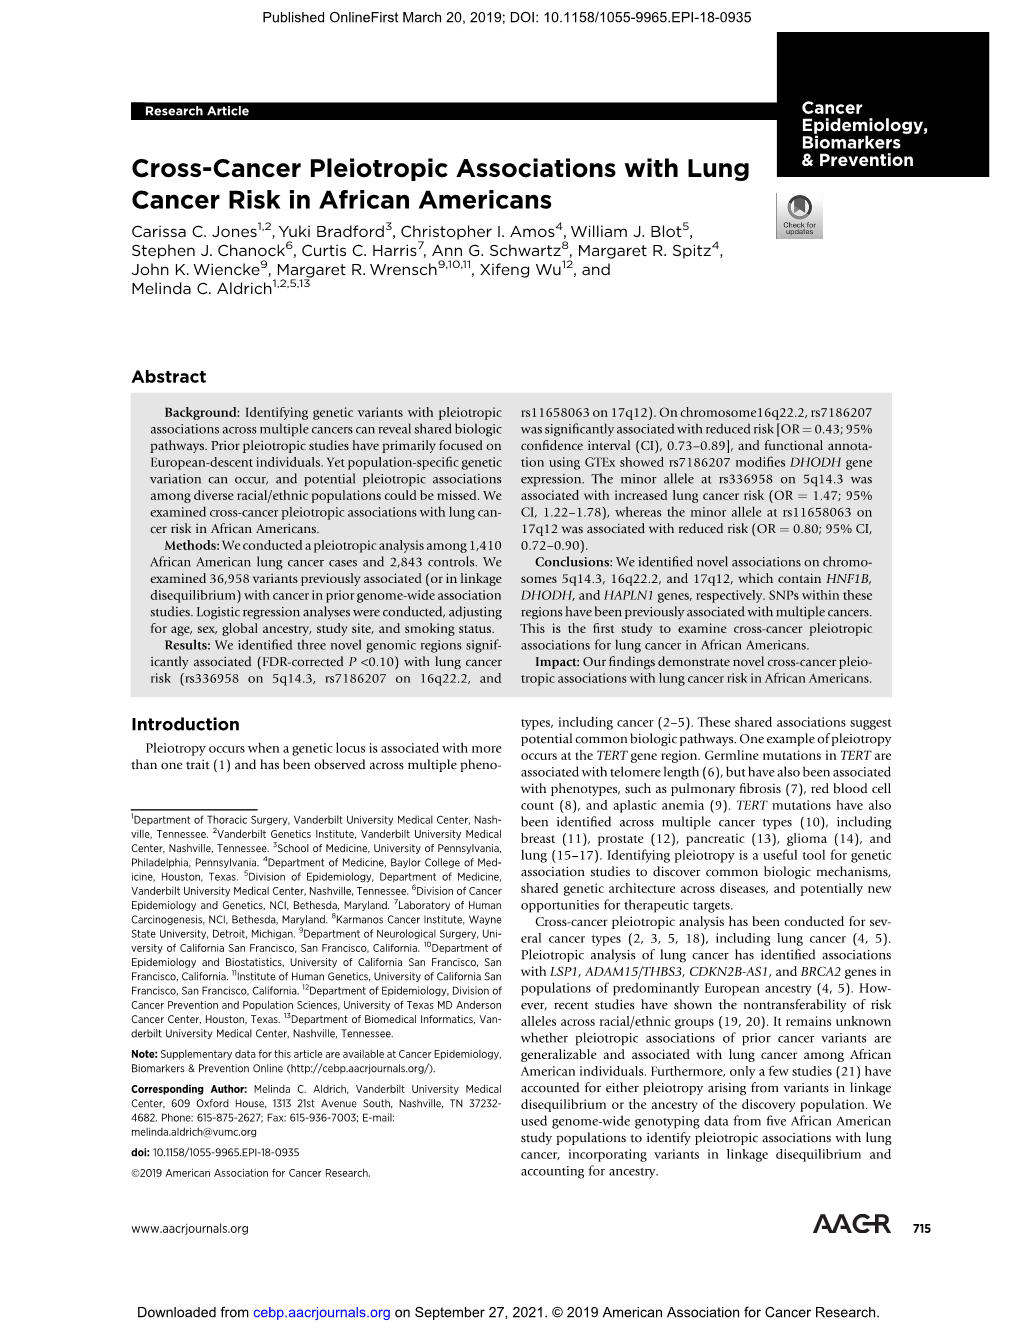 Cross-Cancer Pleiotropic Associations with Lung Cancer Risk in African Americans